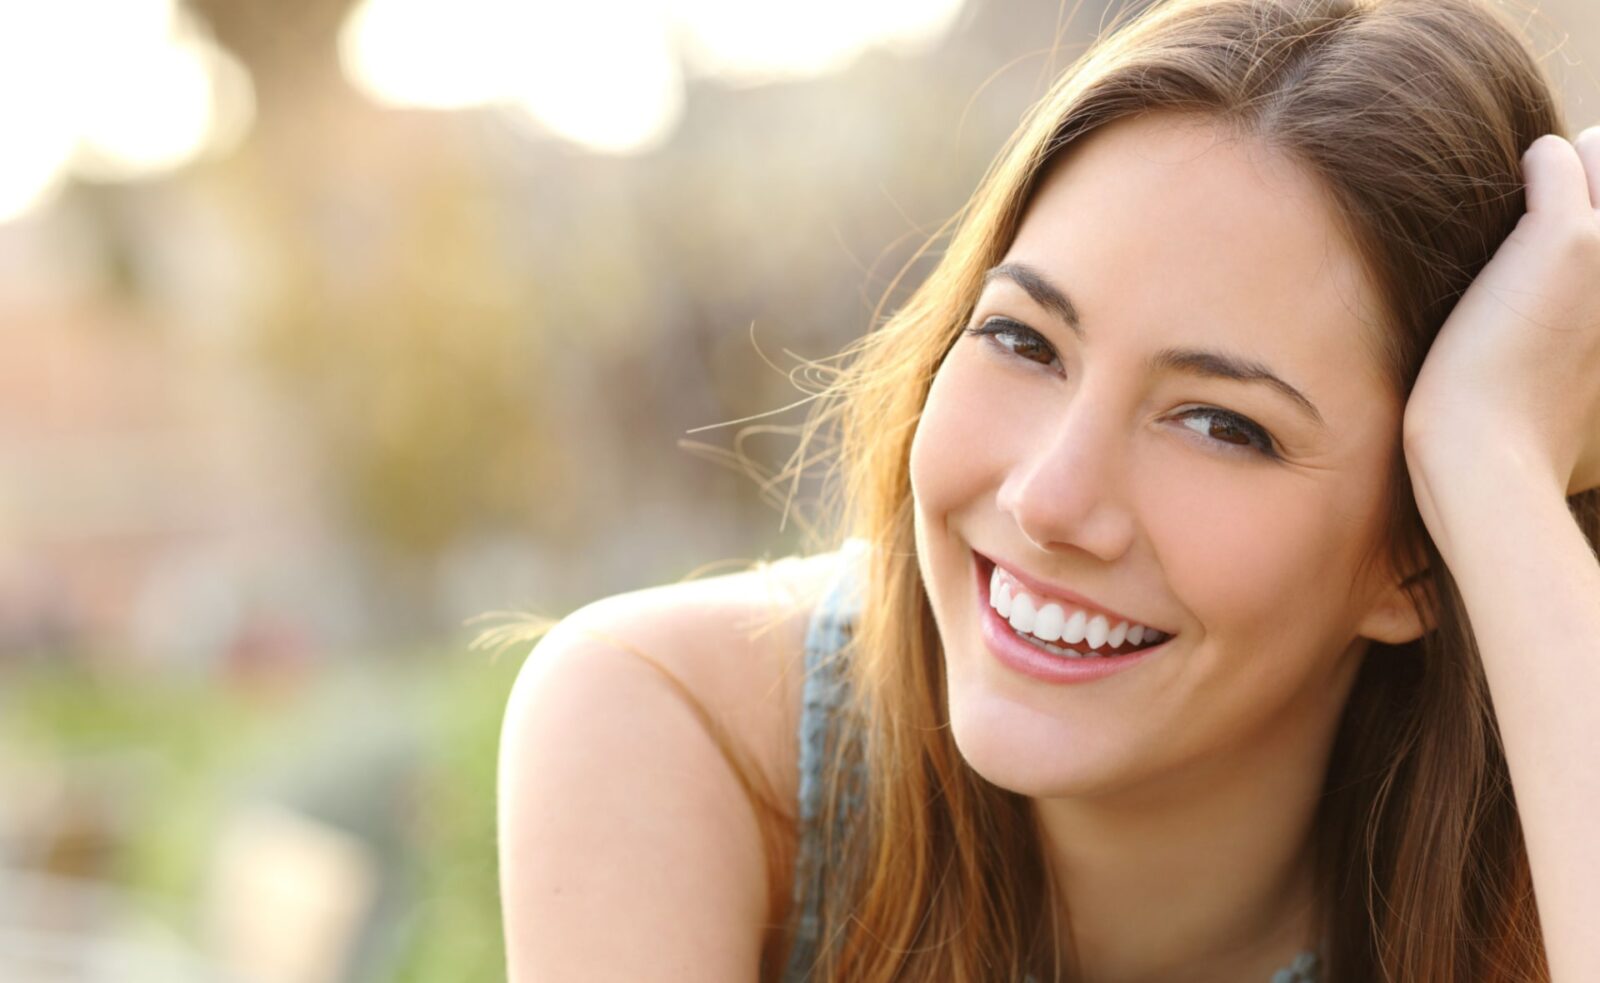 Woman smiling with perfect smile and white teeth